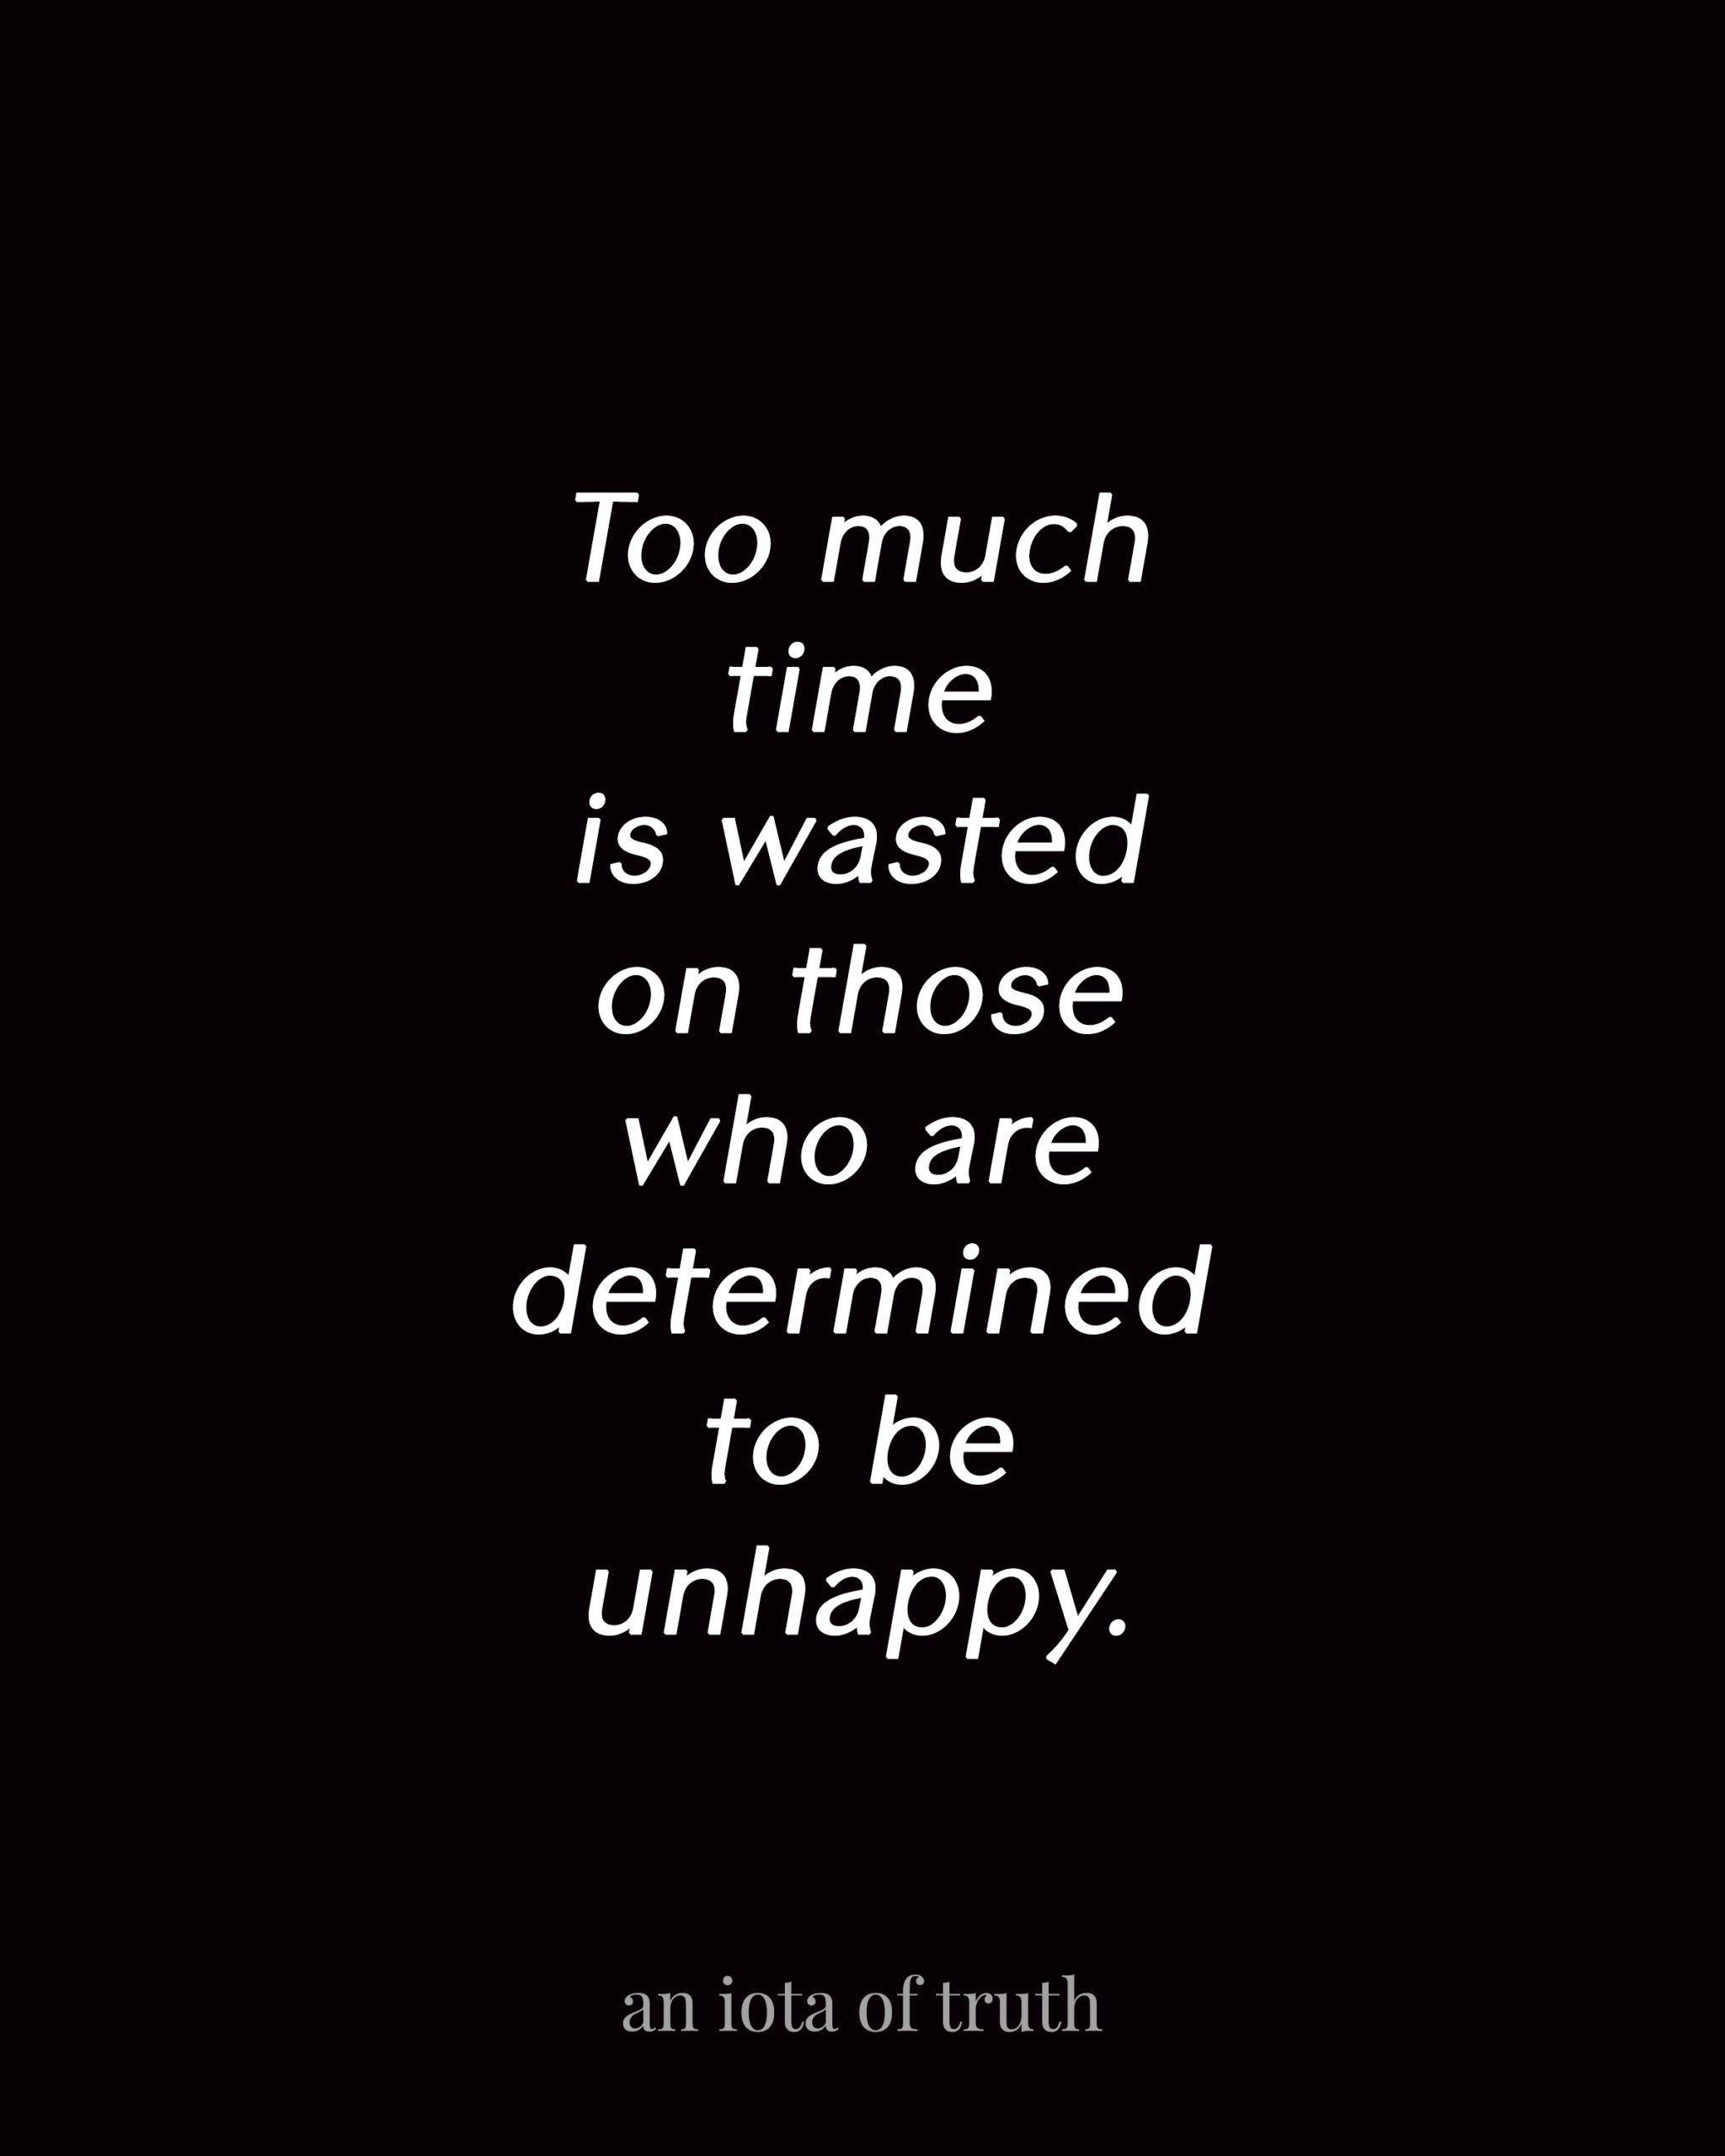 Too much time is wasted on those who are determined to be unhappy.